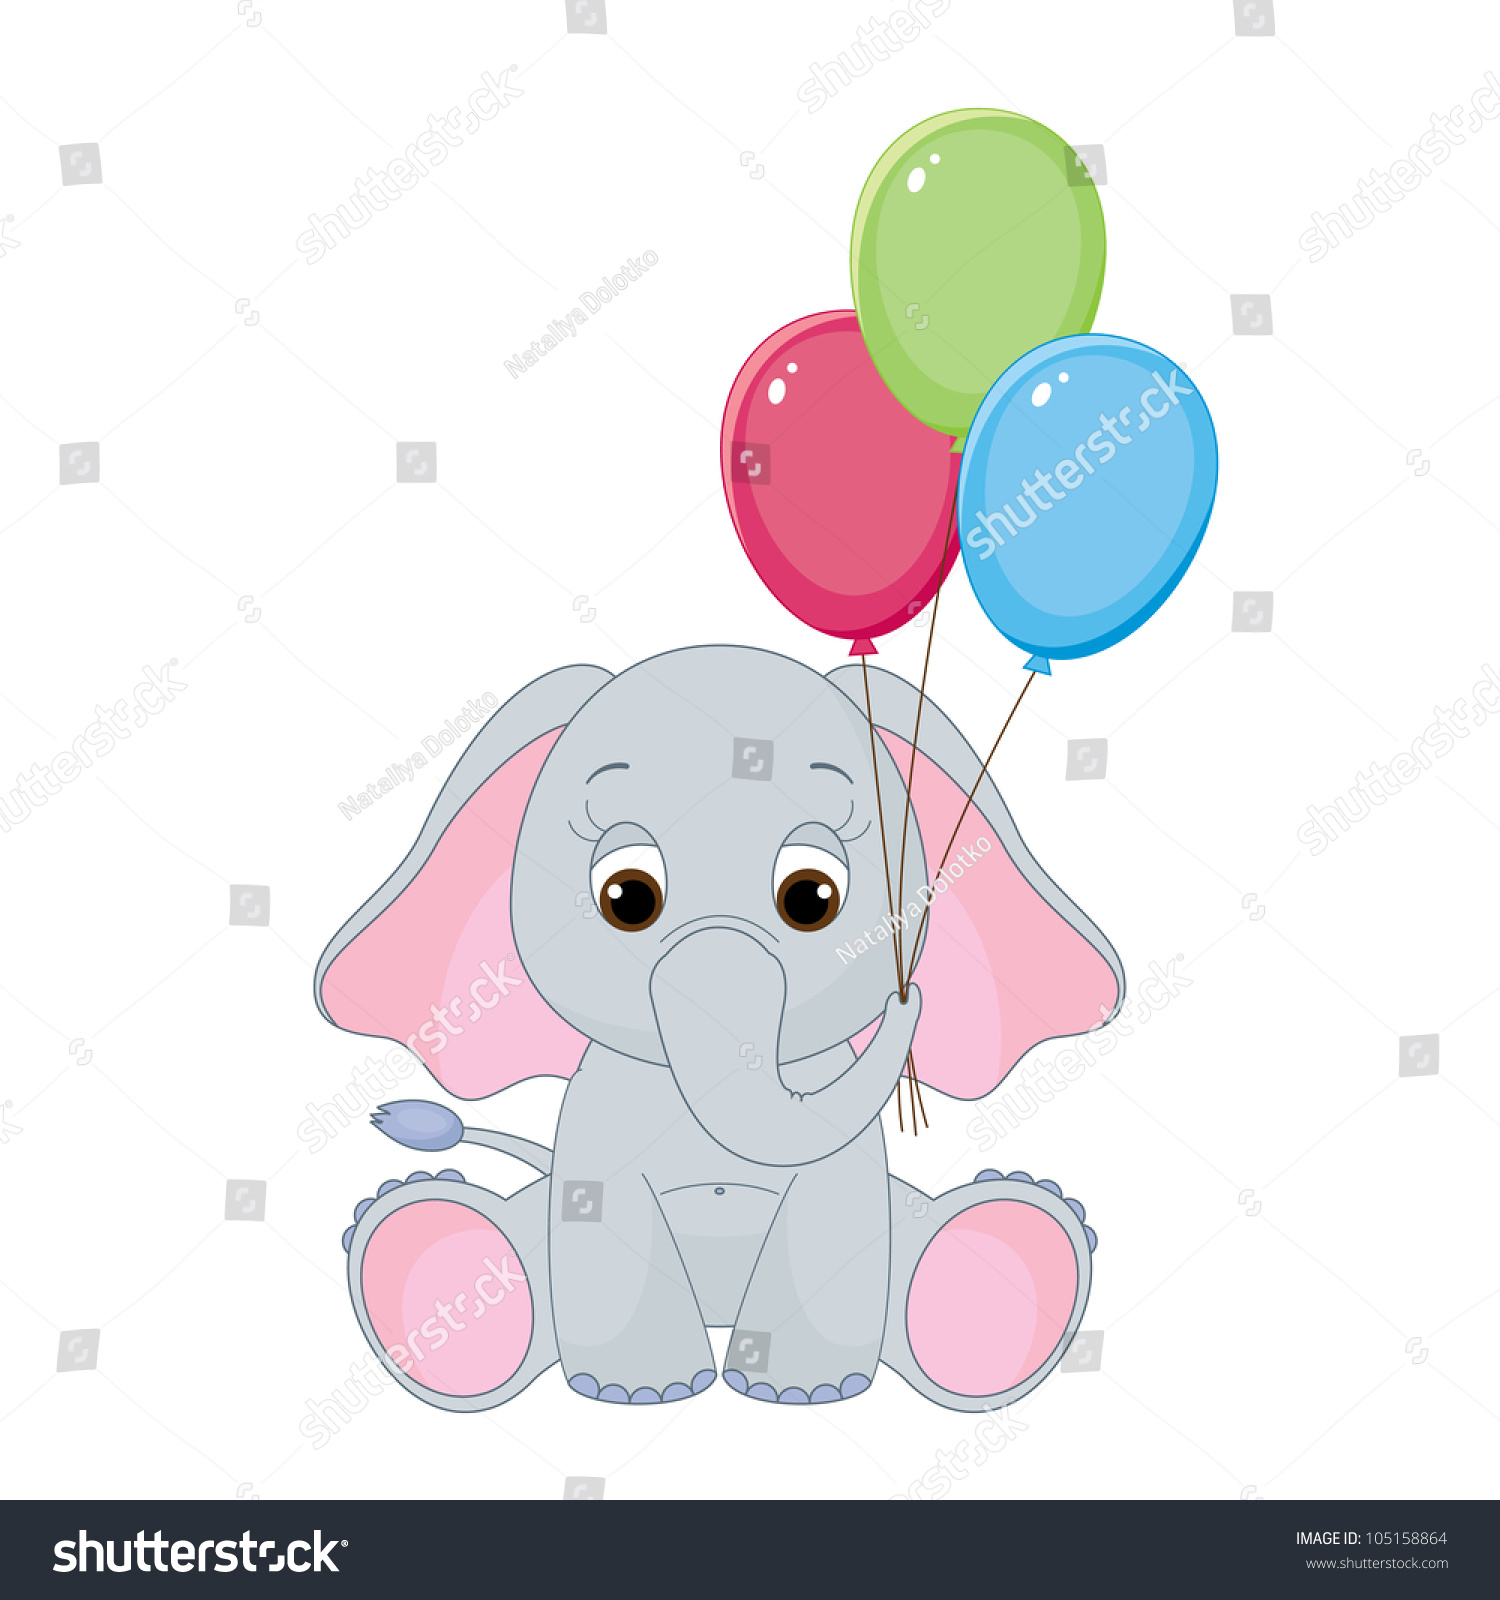 Cute Baby Elephant With Colorful Balloons. Isolated On White Stock